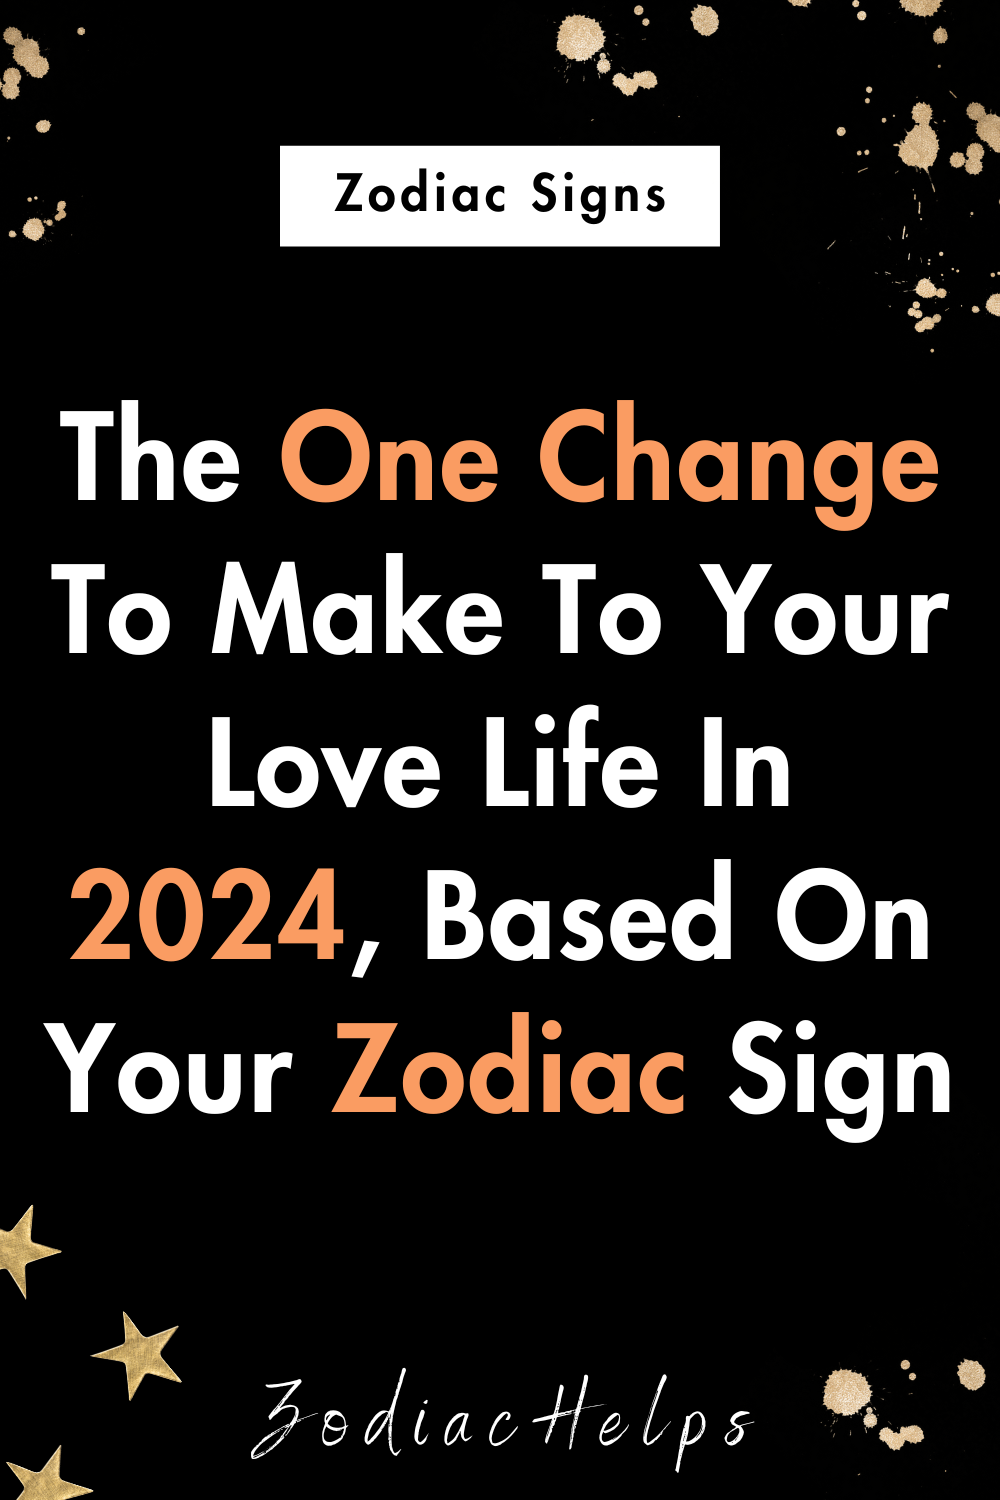 The One Change To Make To Your Love Life In 2024, Based On Your Zodiac Sign